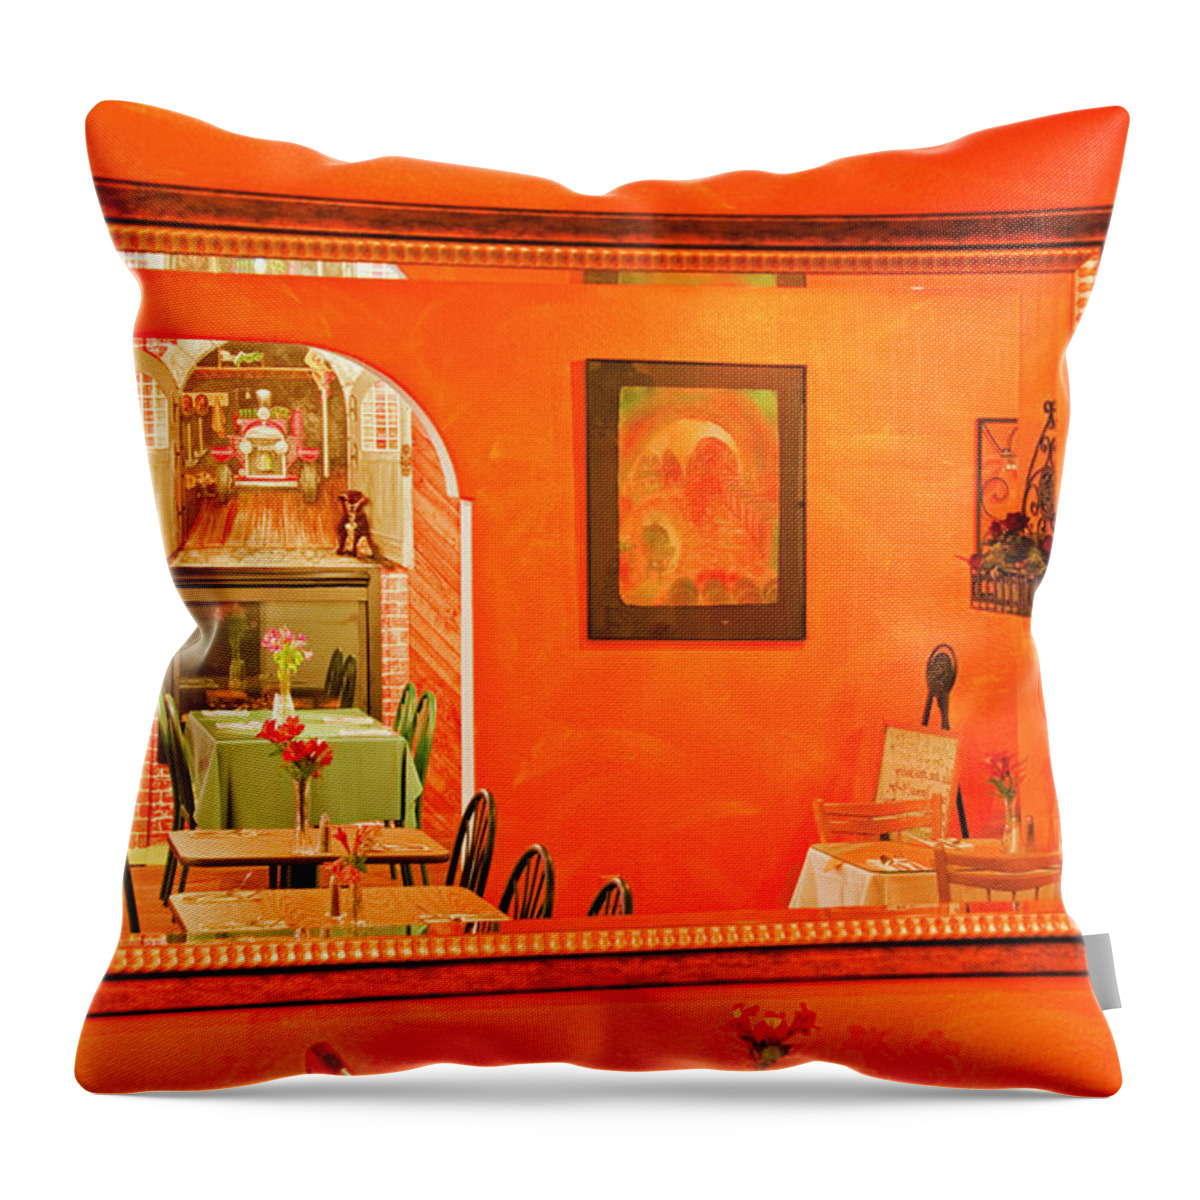 Brookings Throw Pillow featuring the photograph Suzy Q's Mirror by Dan McGeorge